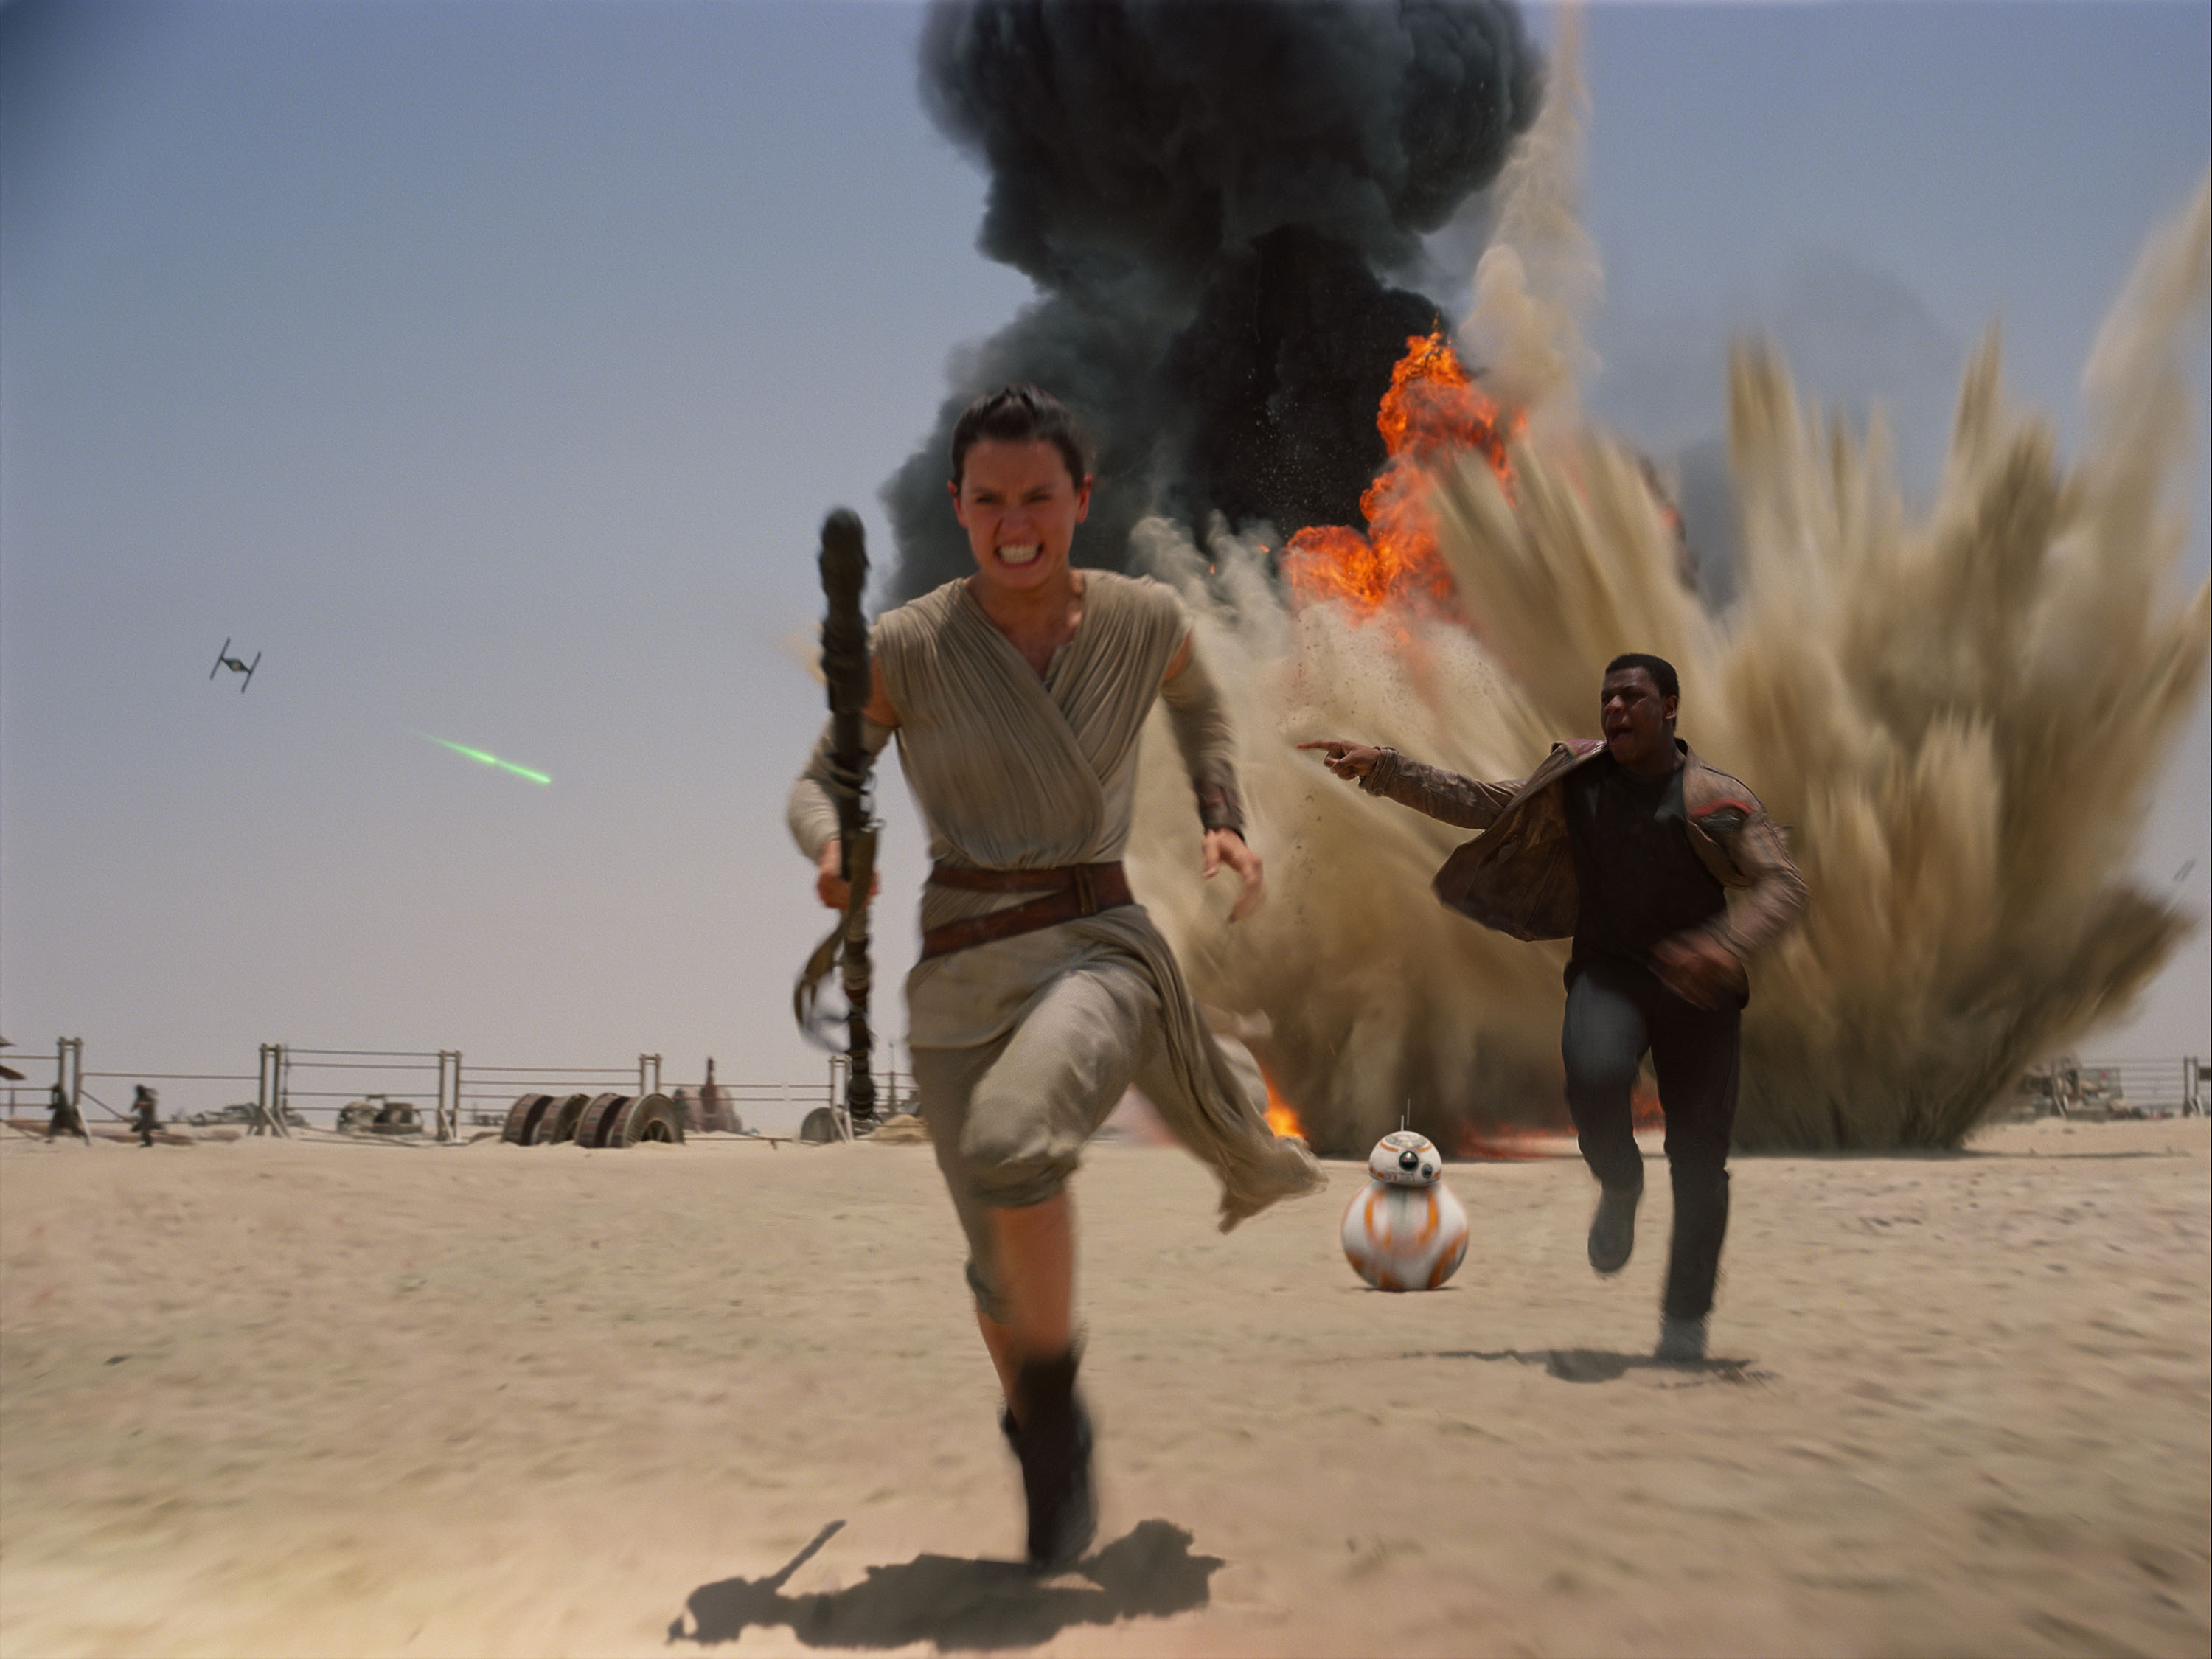 Review: ‘The Force Awakens’ is the best ‘Star Wars’ in 35 years